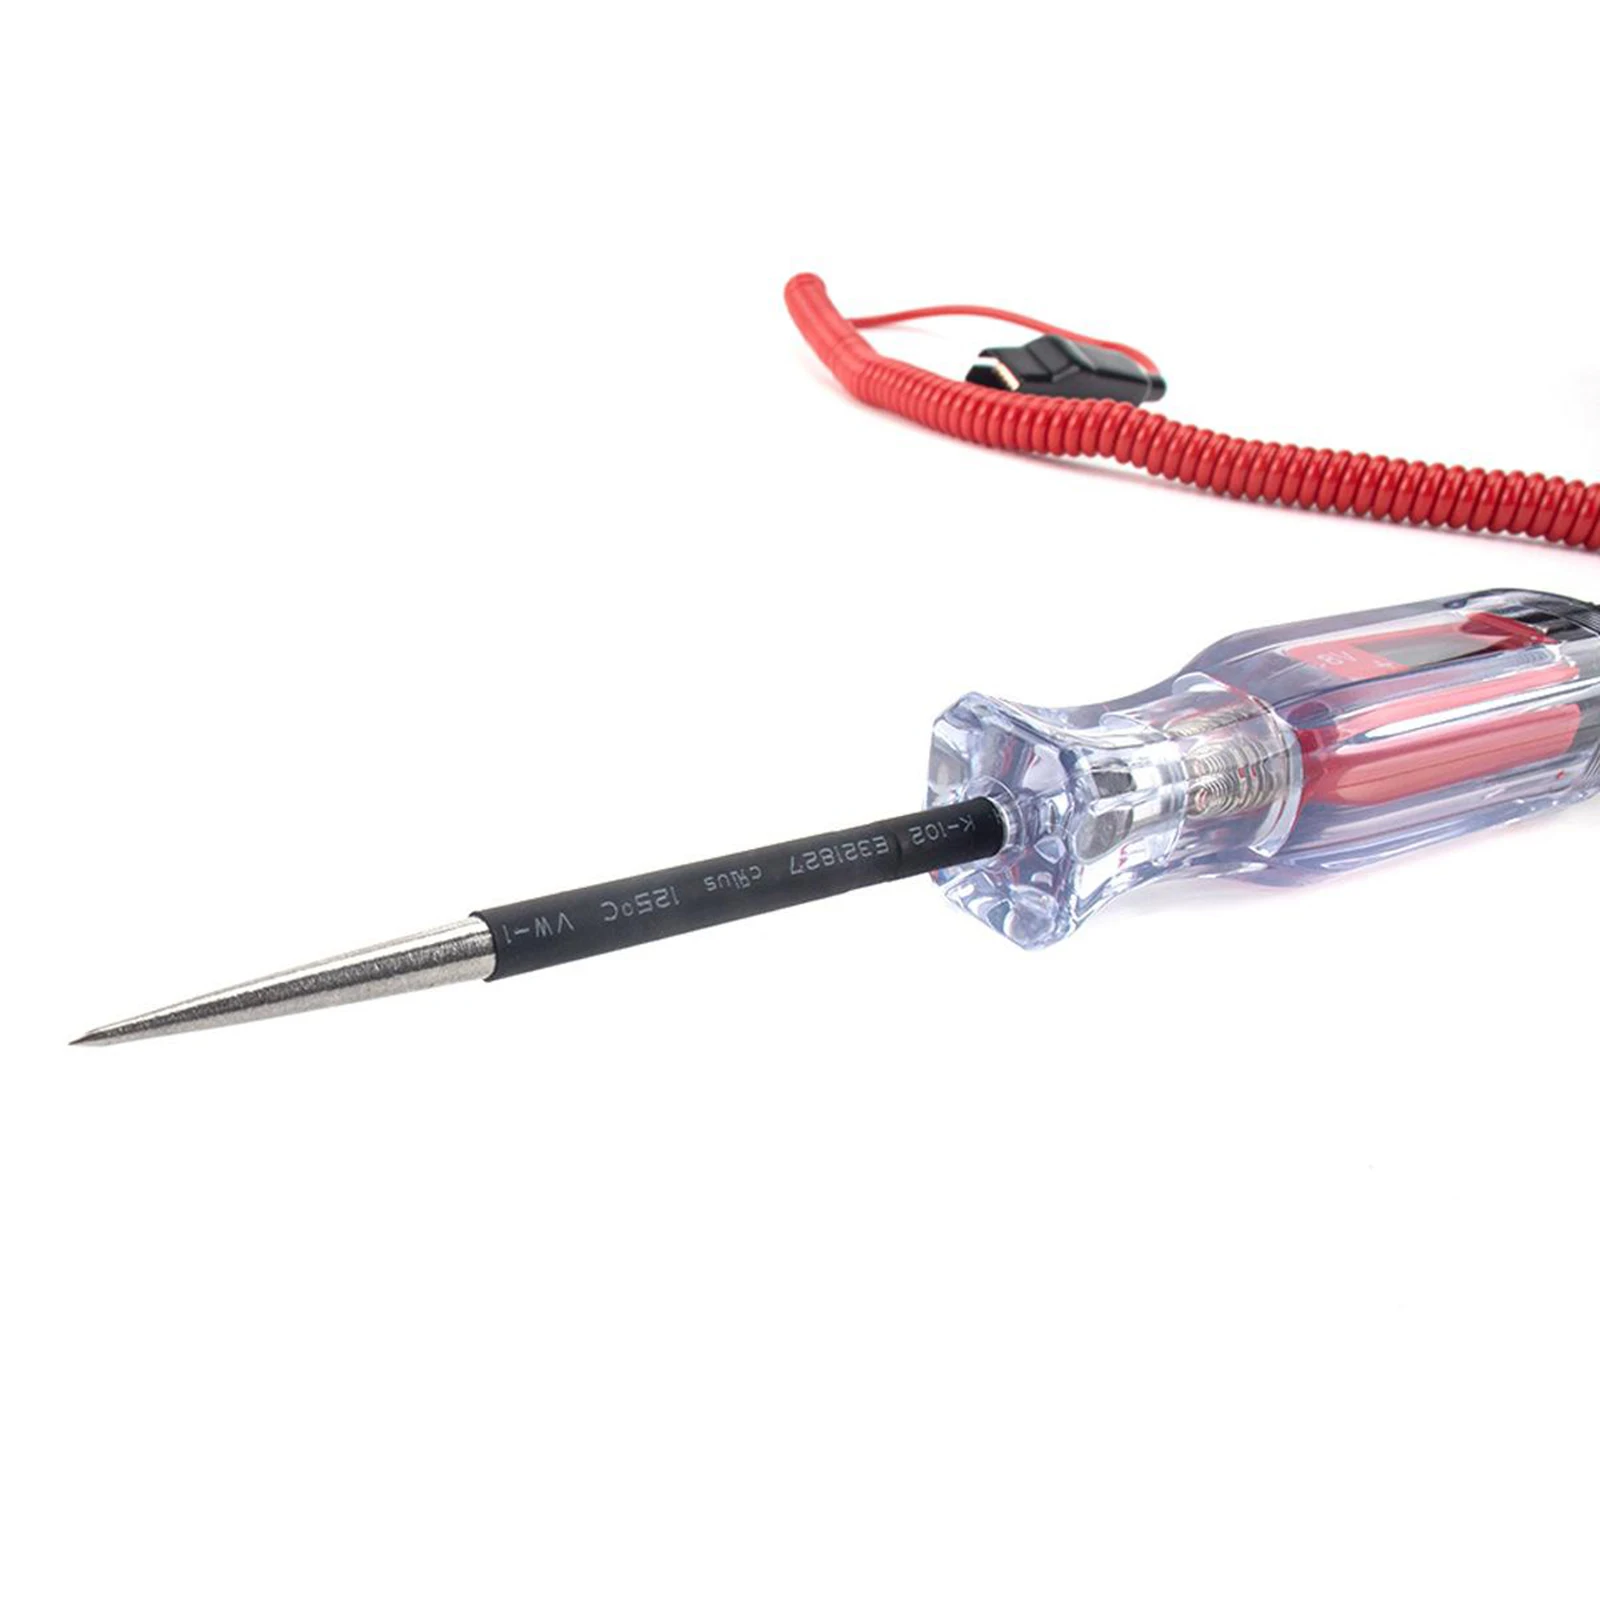 3-48V Auto Electric Circuit Tester Car Automotive with Stainless Probe